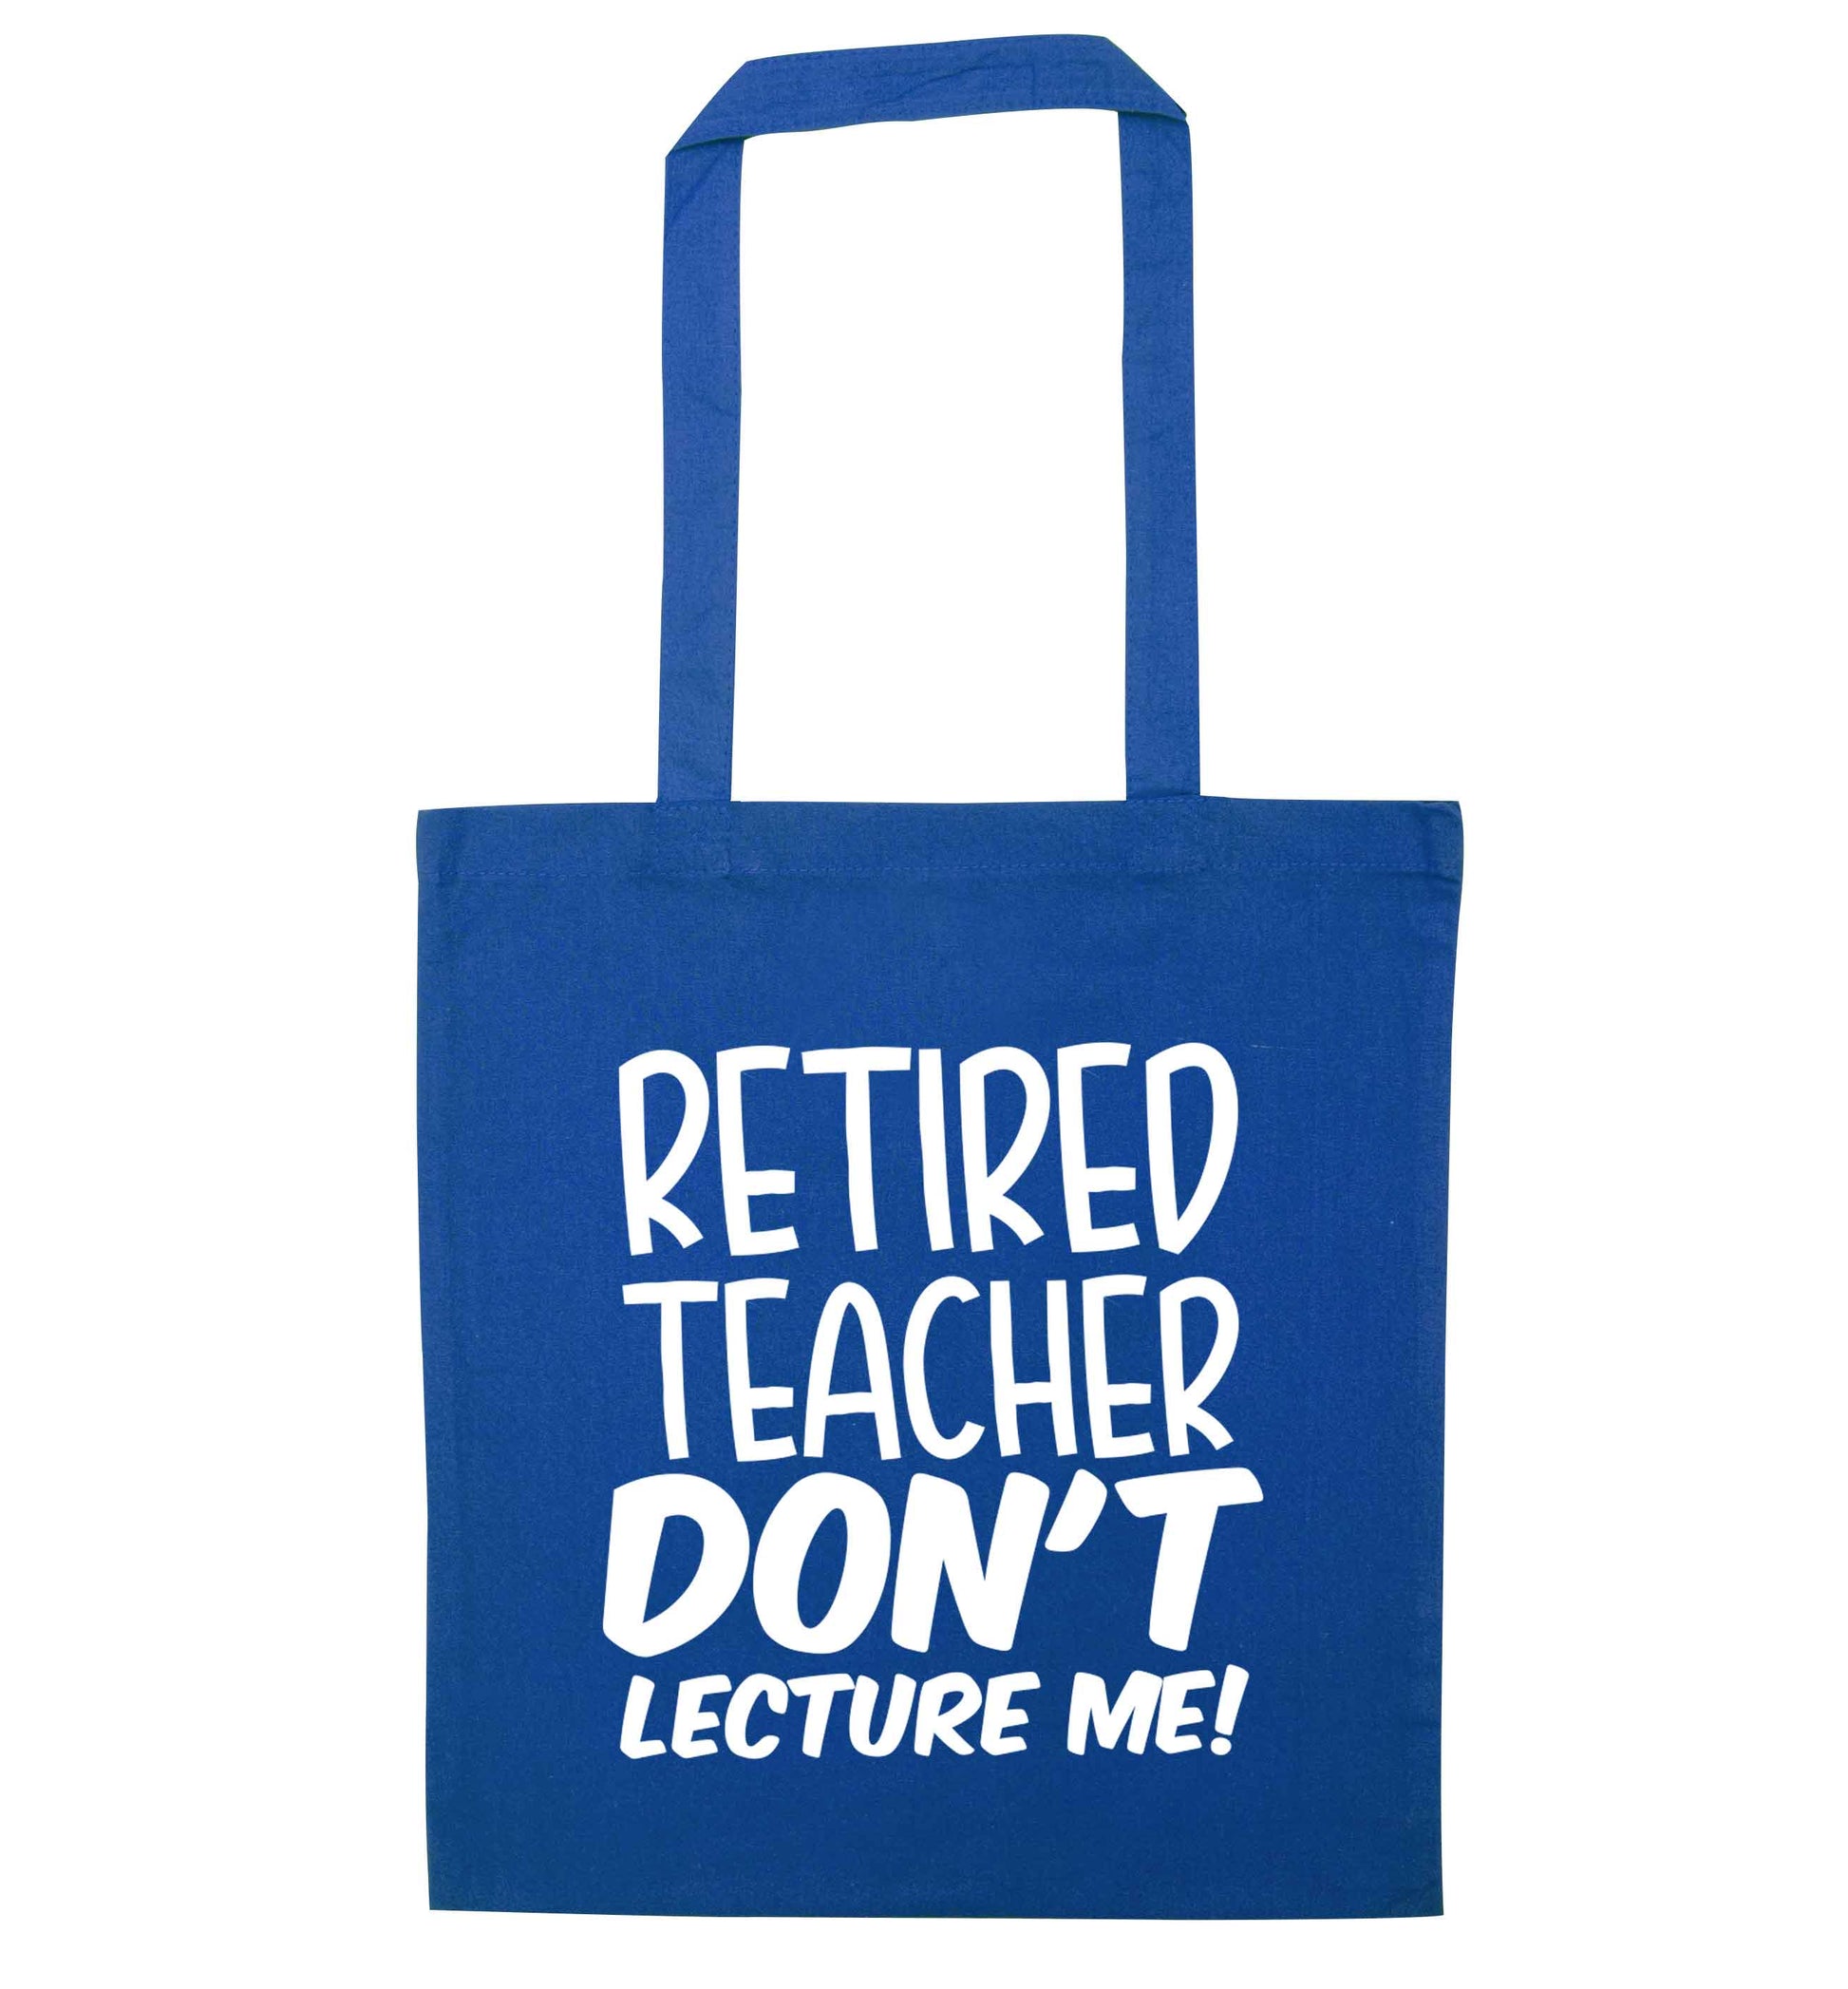 Retired teacher don't lecture me! blue tote bag